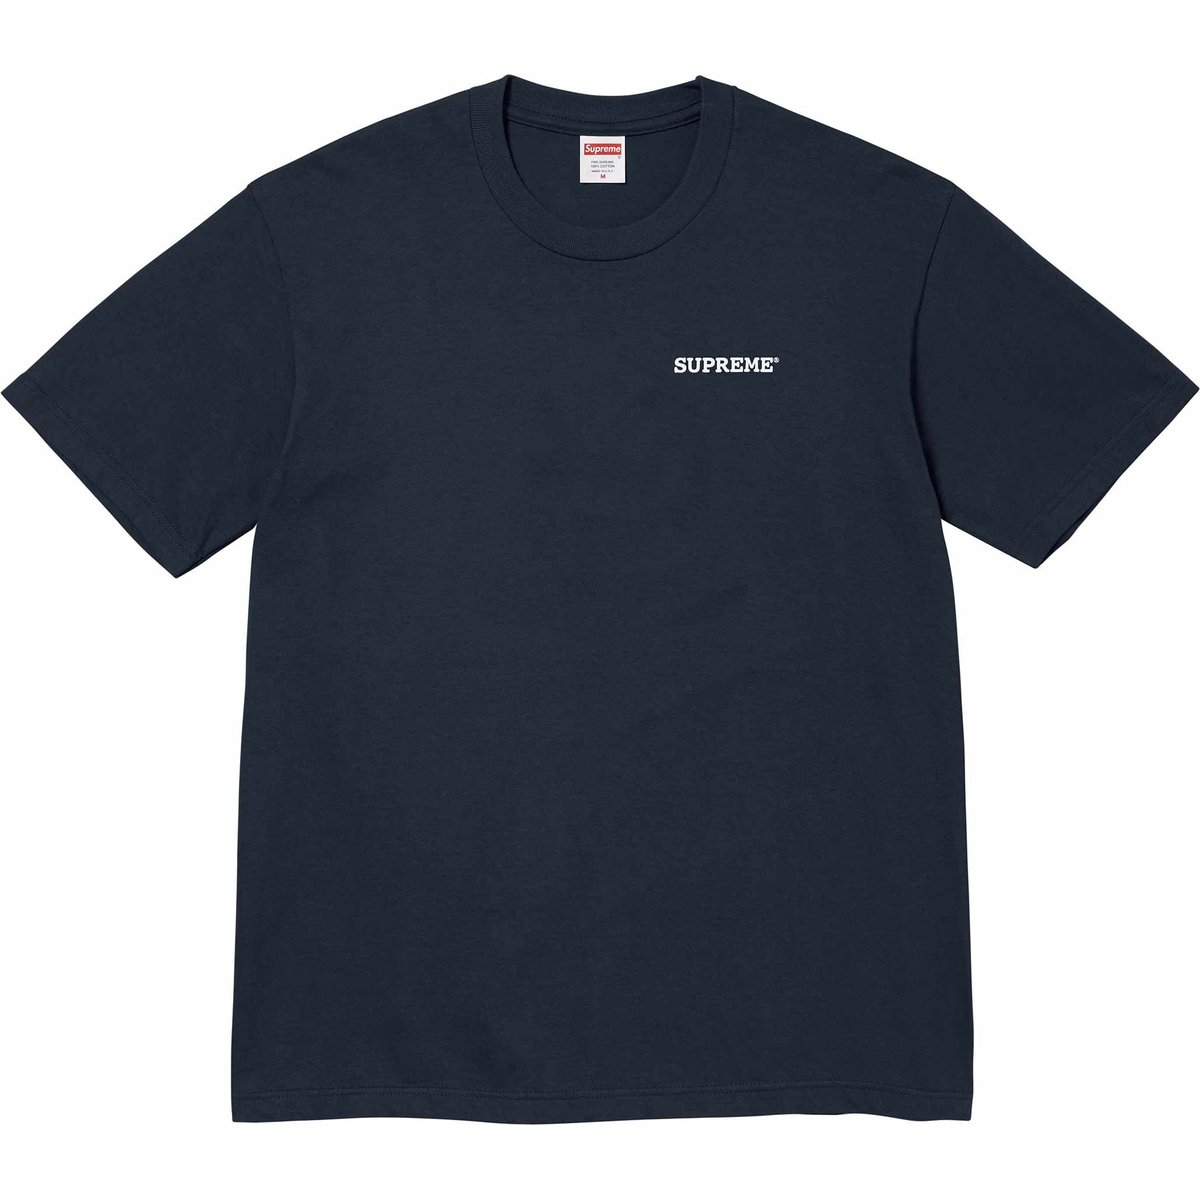 Supreme Patchwork Tee released during spring summer 24 season